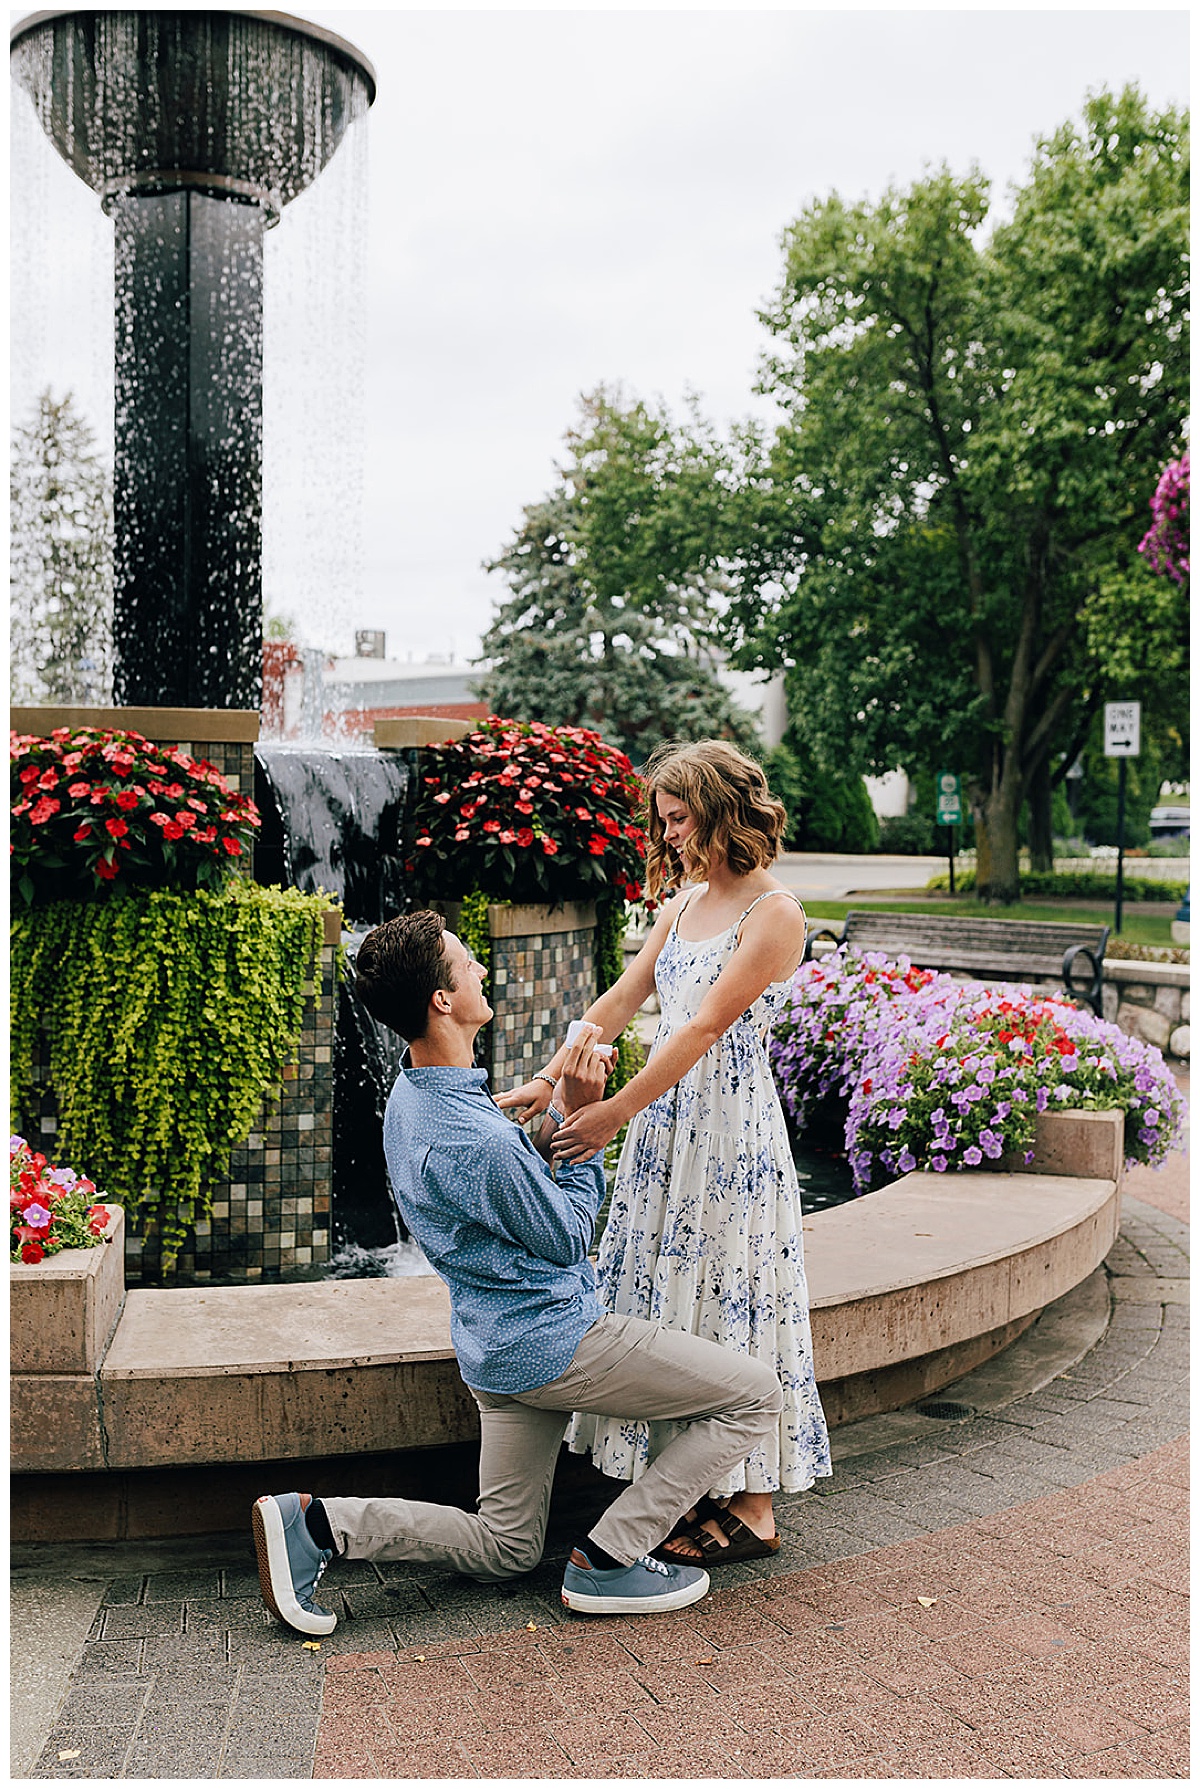 Man proposes to woman at Zehnder’s Fountain Proposal